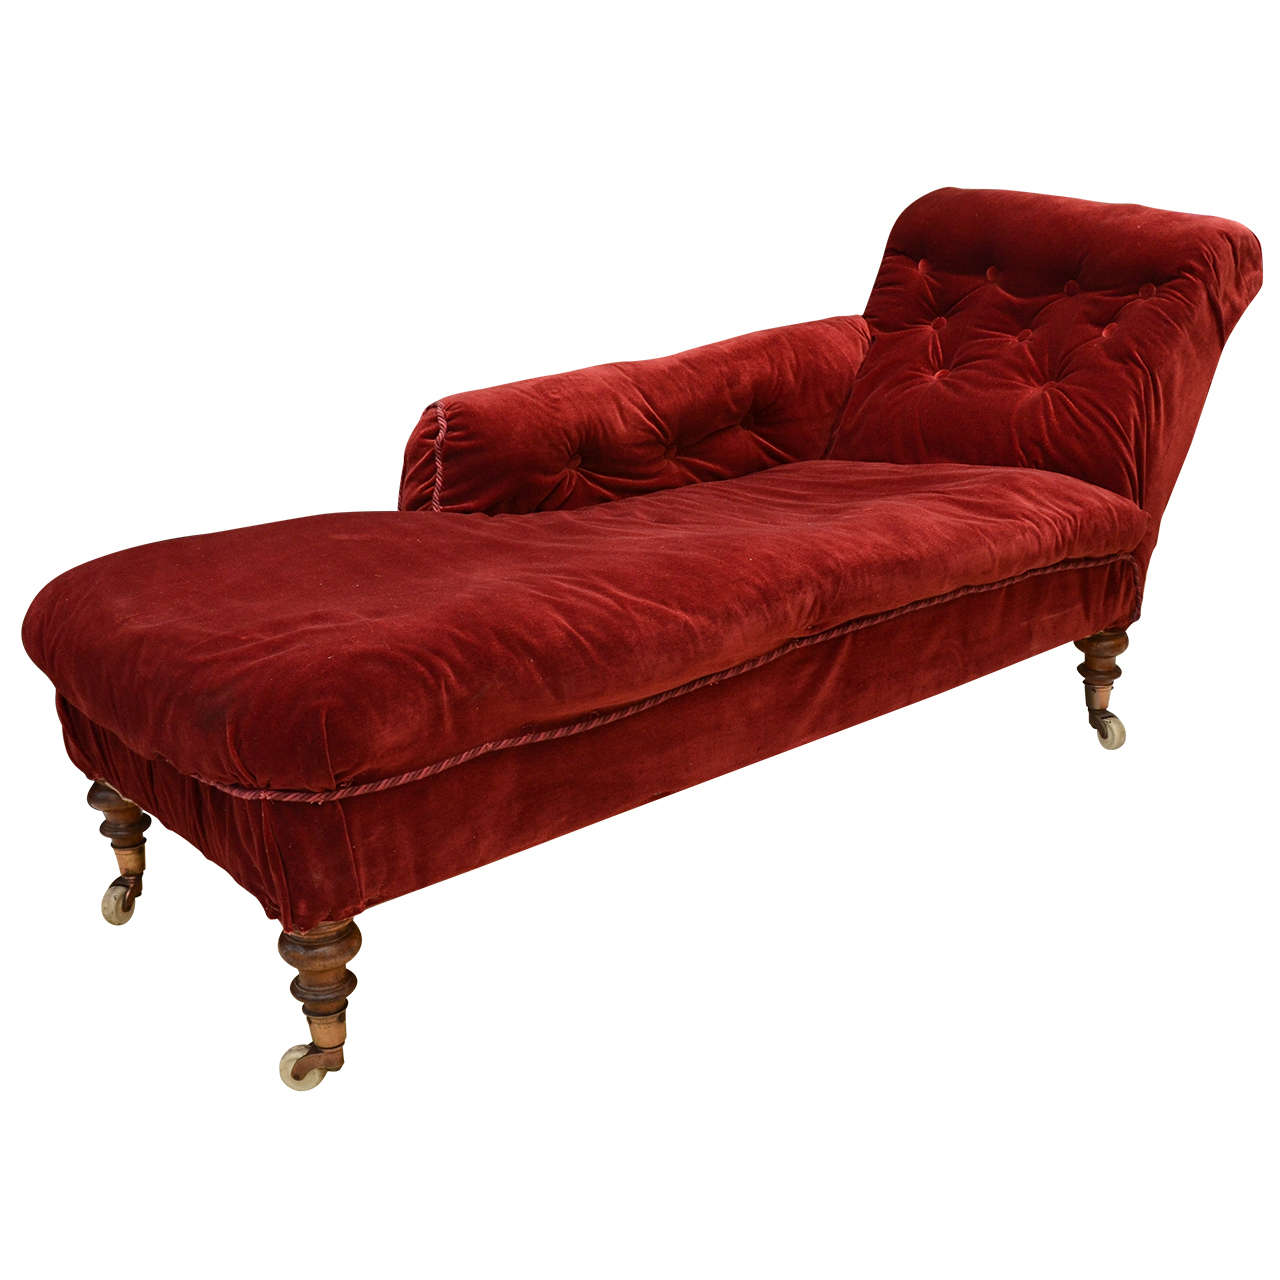 English Victorian Tufted Chaise Longue